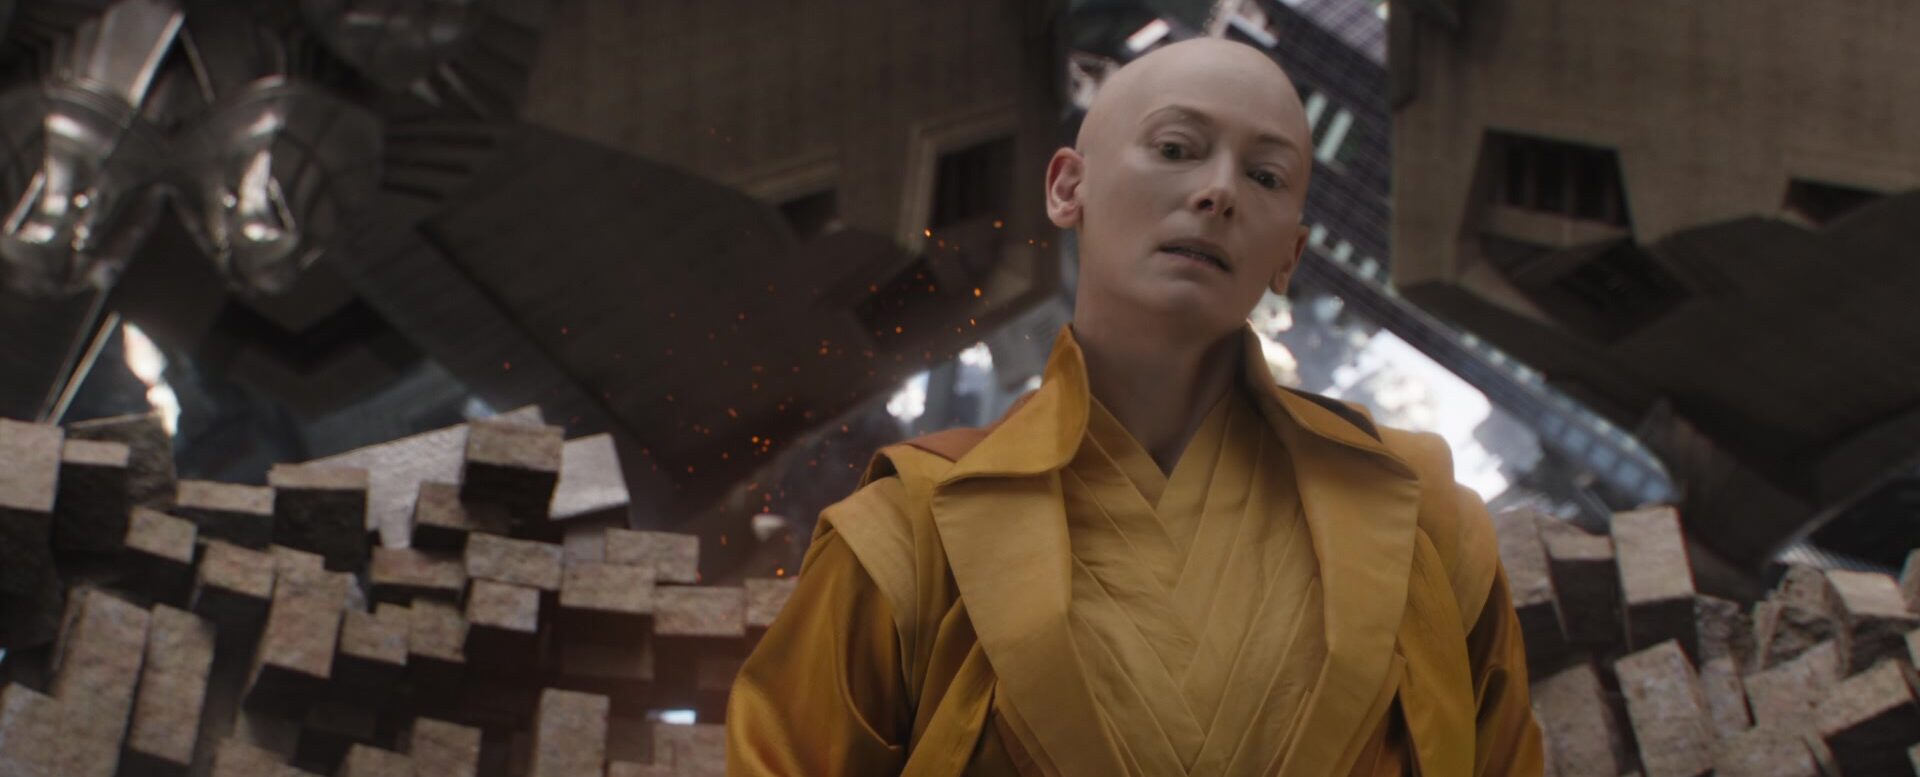 The Ancient One (Tilda Swinton) confronts Kaecilius (Mads Mikkelsen) in the Mirror Dimension in Doctor Strange (2016), Marvel Entertainment